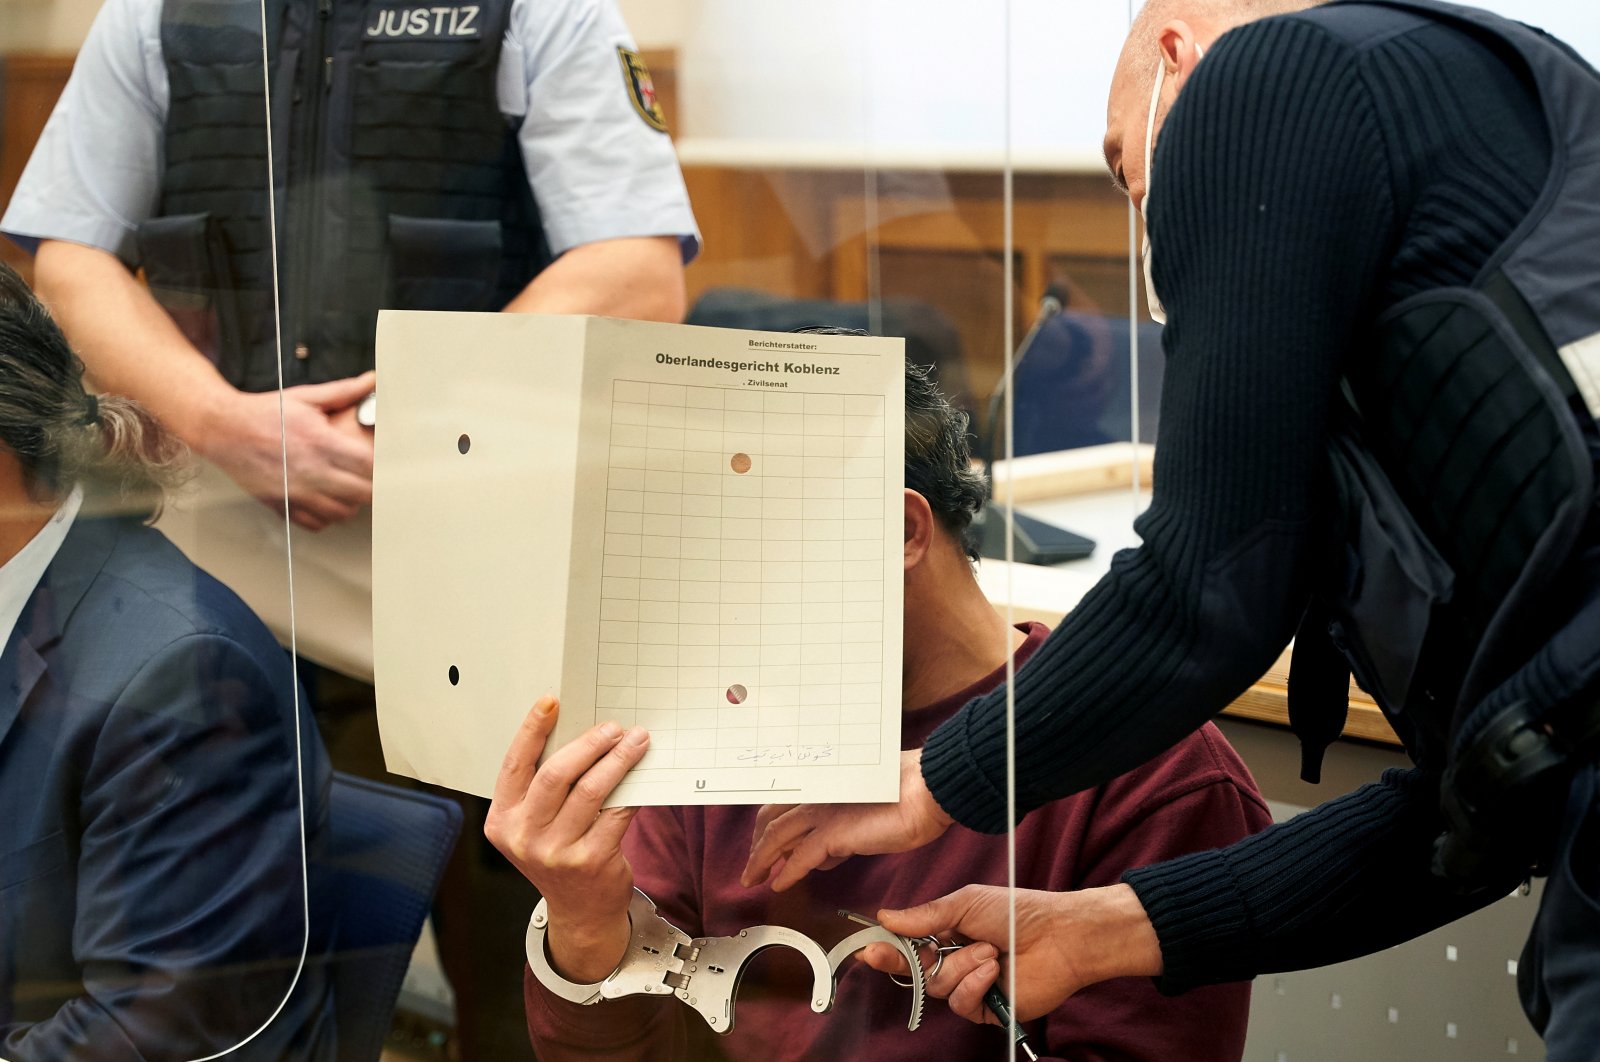 Staff removes handcuffs from Syrian defendant Eyad al-Gharib as he arrives to hear the verdict in the courtroom in Koblenz, Germany on Feb. 24, 2021.  (Reuters Photo)